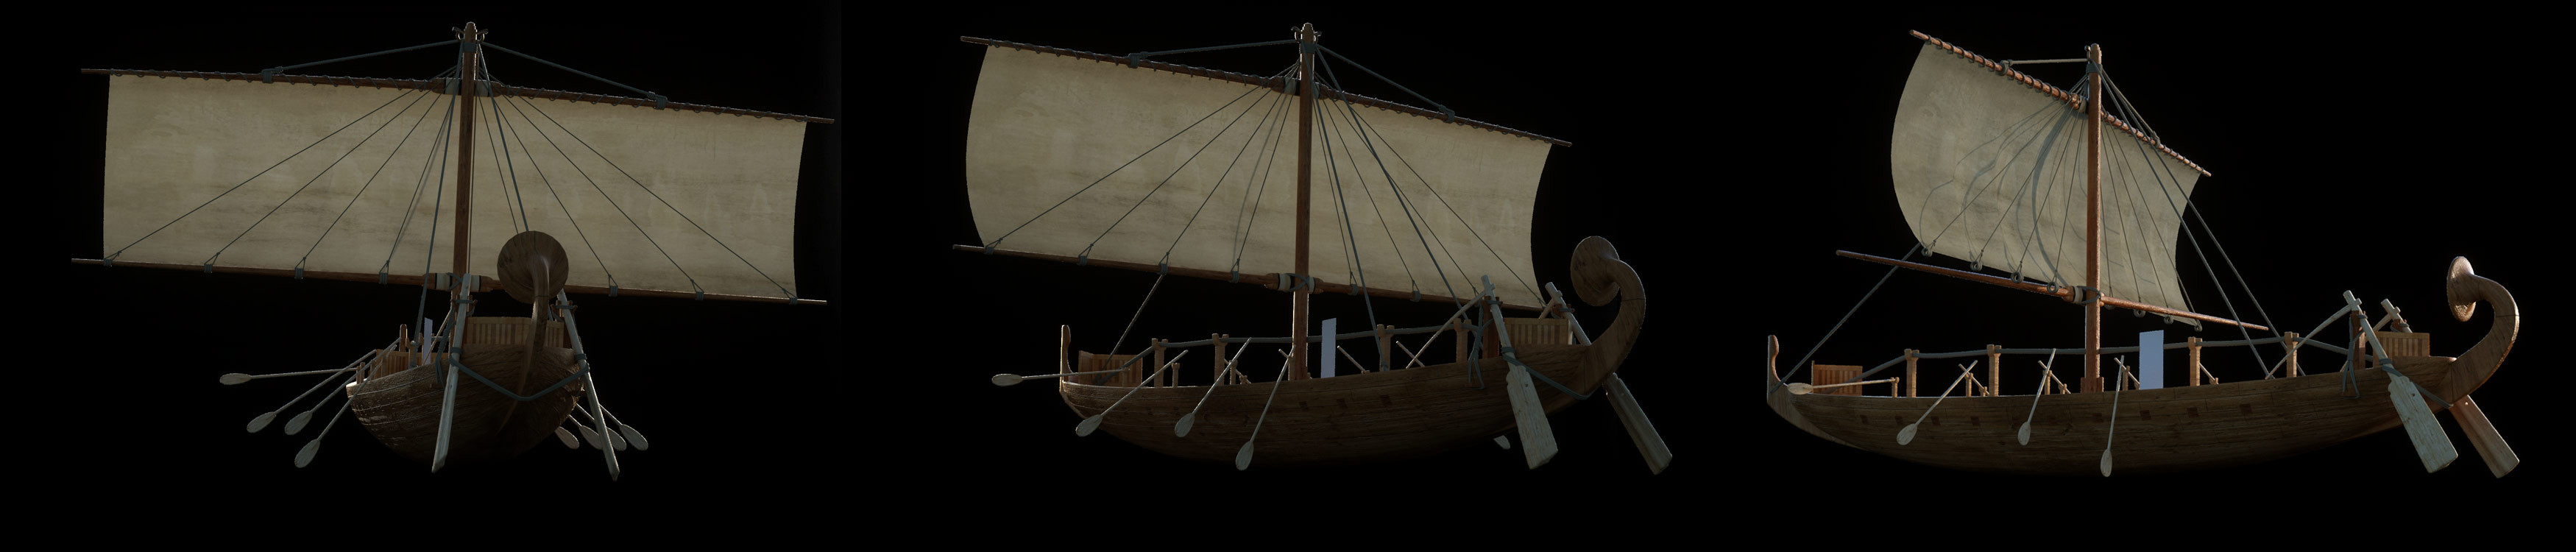 boat design and renders